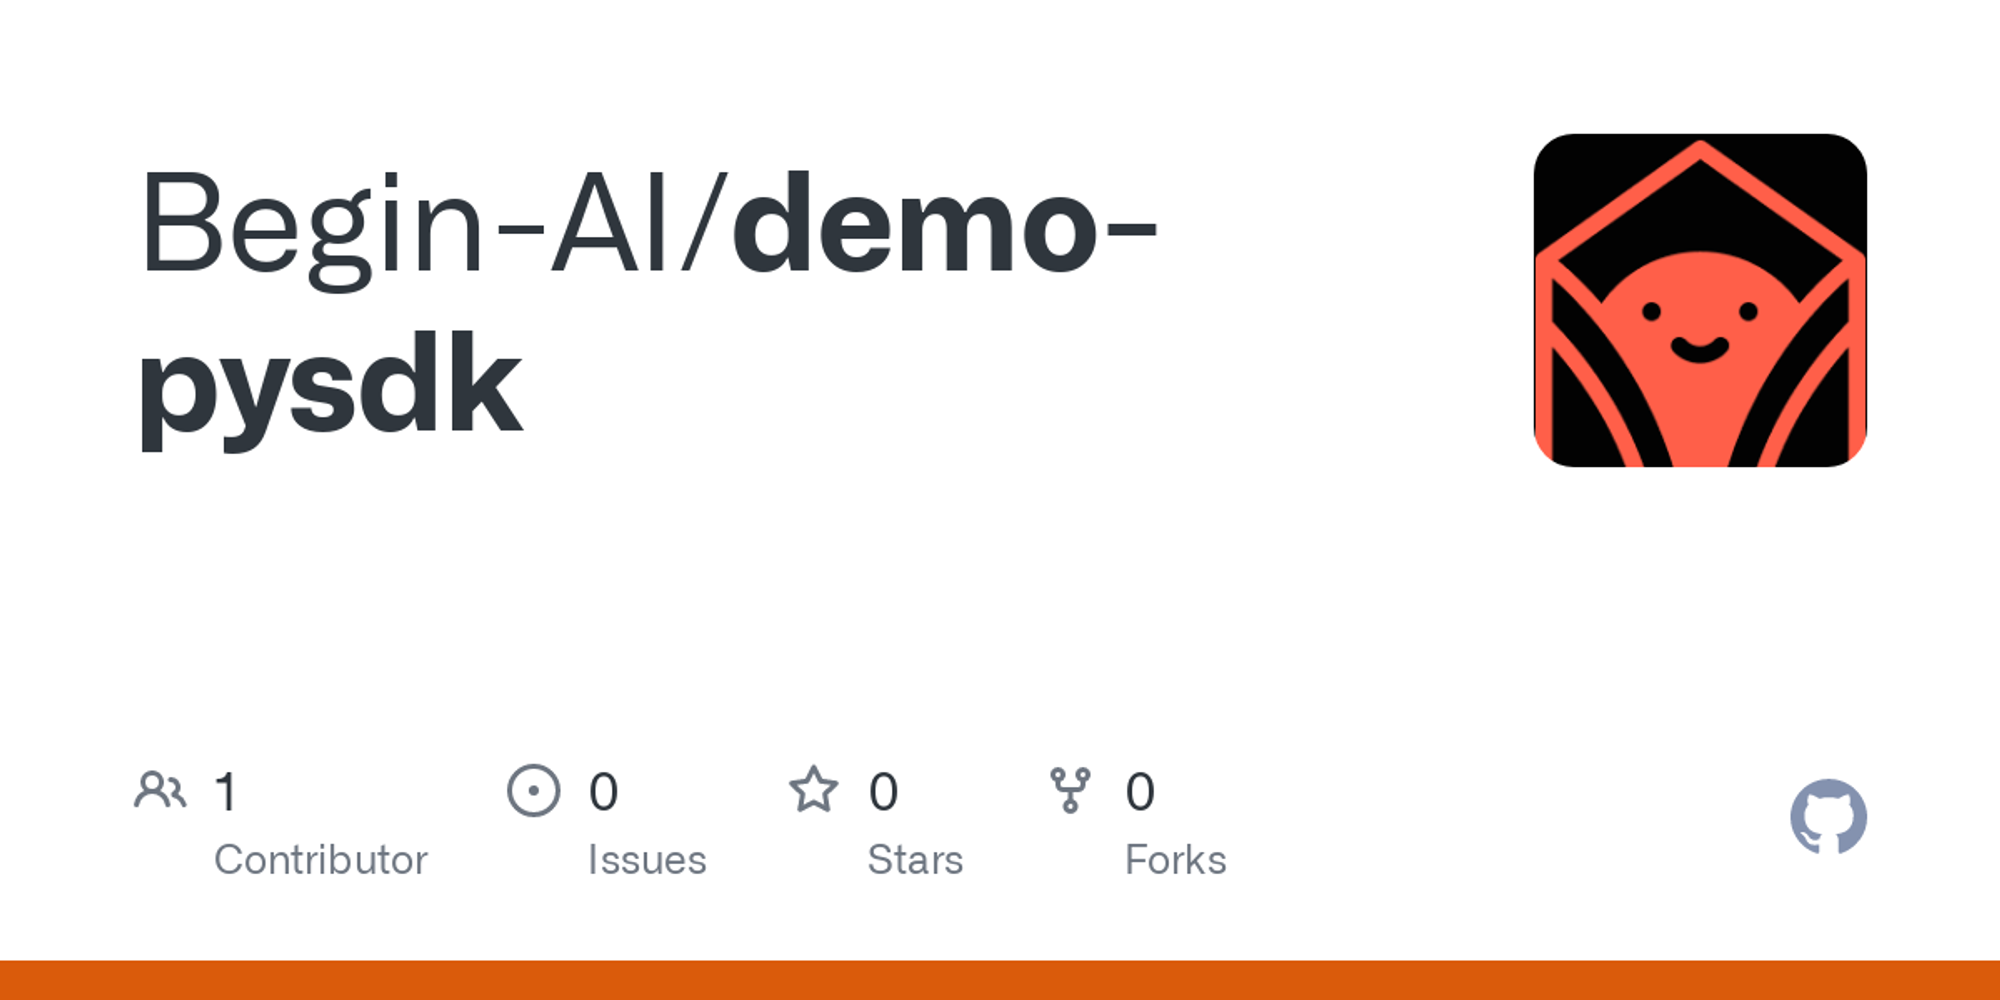 demo-pysdk/Get recommendations for users.ipynb at main · Begin-AI/demo-pysdk